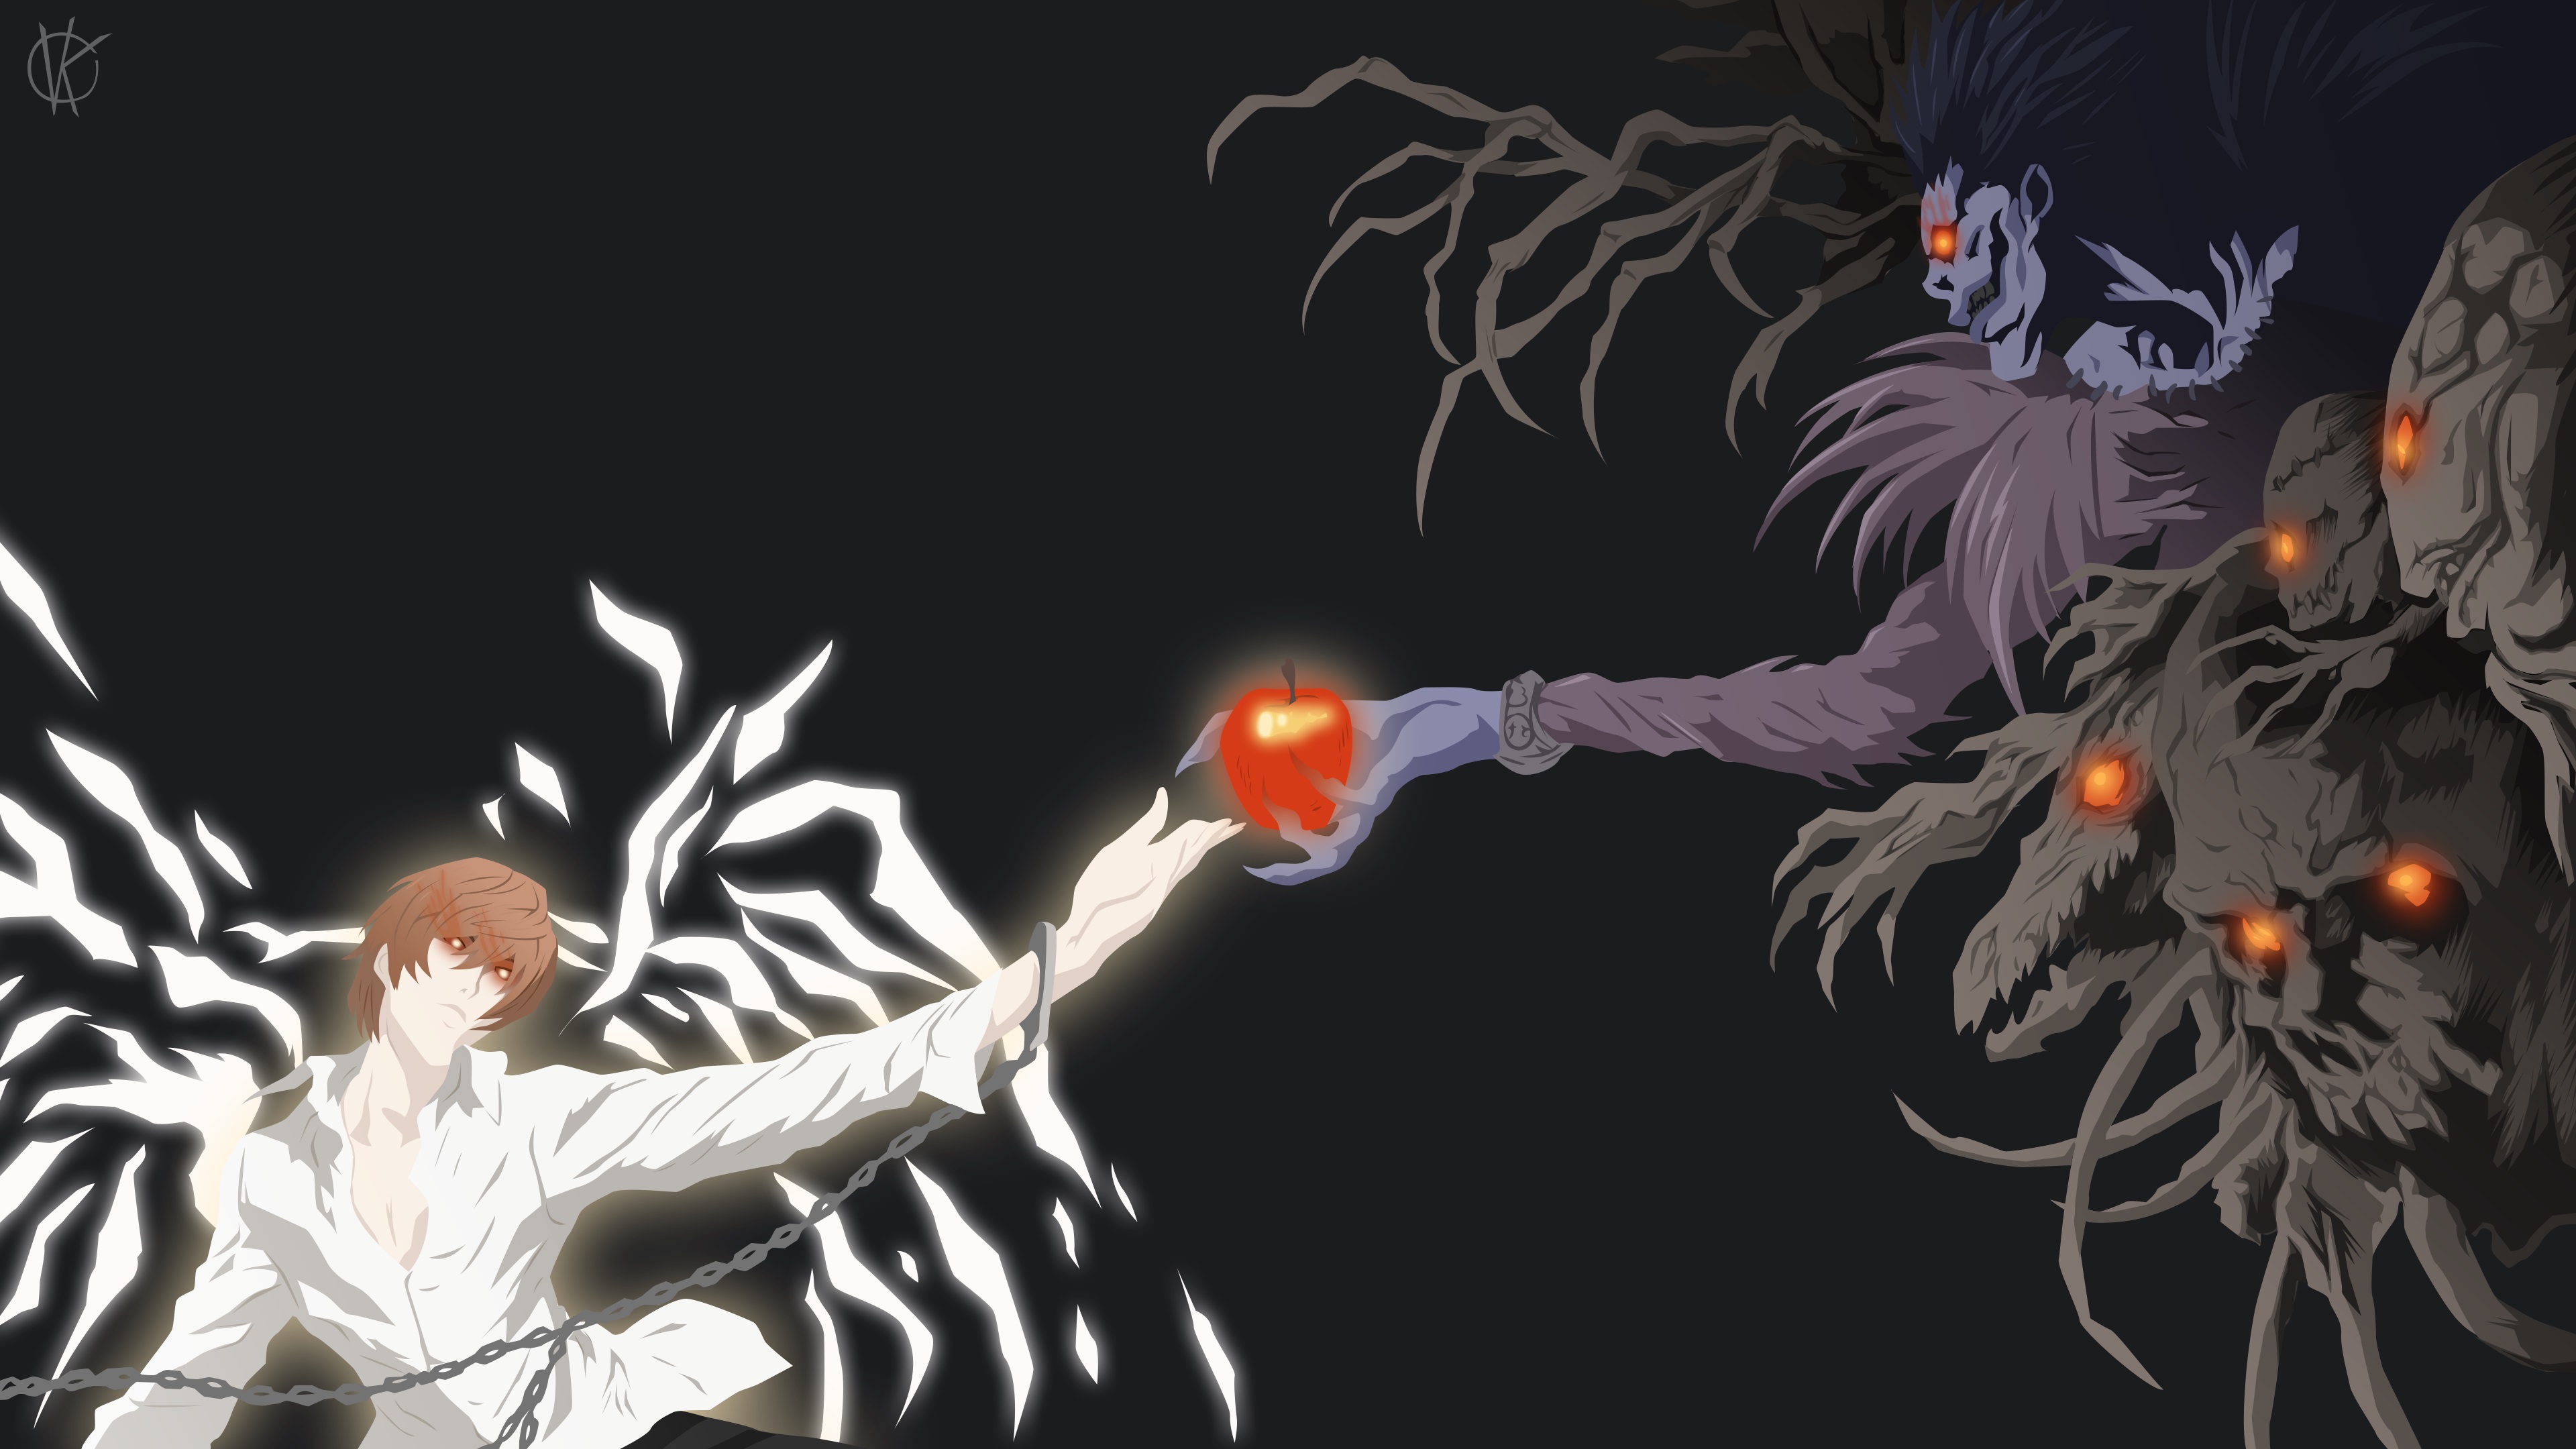 The Creation Of Kira 4k Ultra Hd Wallpaper Background Image 3840x2160 Id 1053000 Wallpaper Abyss Ryuk from death note anime in a synthwave style wallpaper hd and 4k. the creation of kira 4k ultra hd